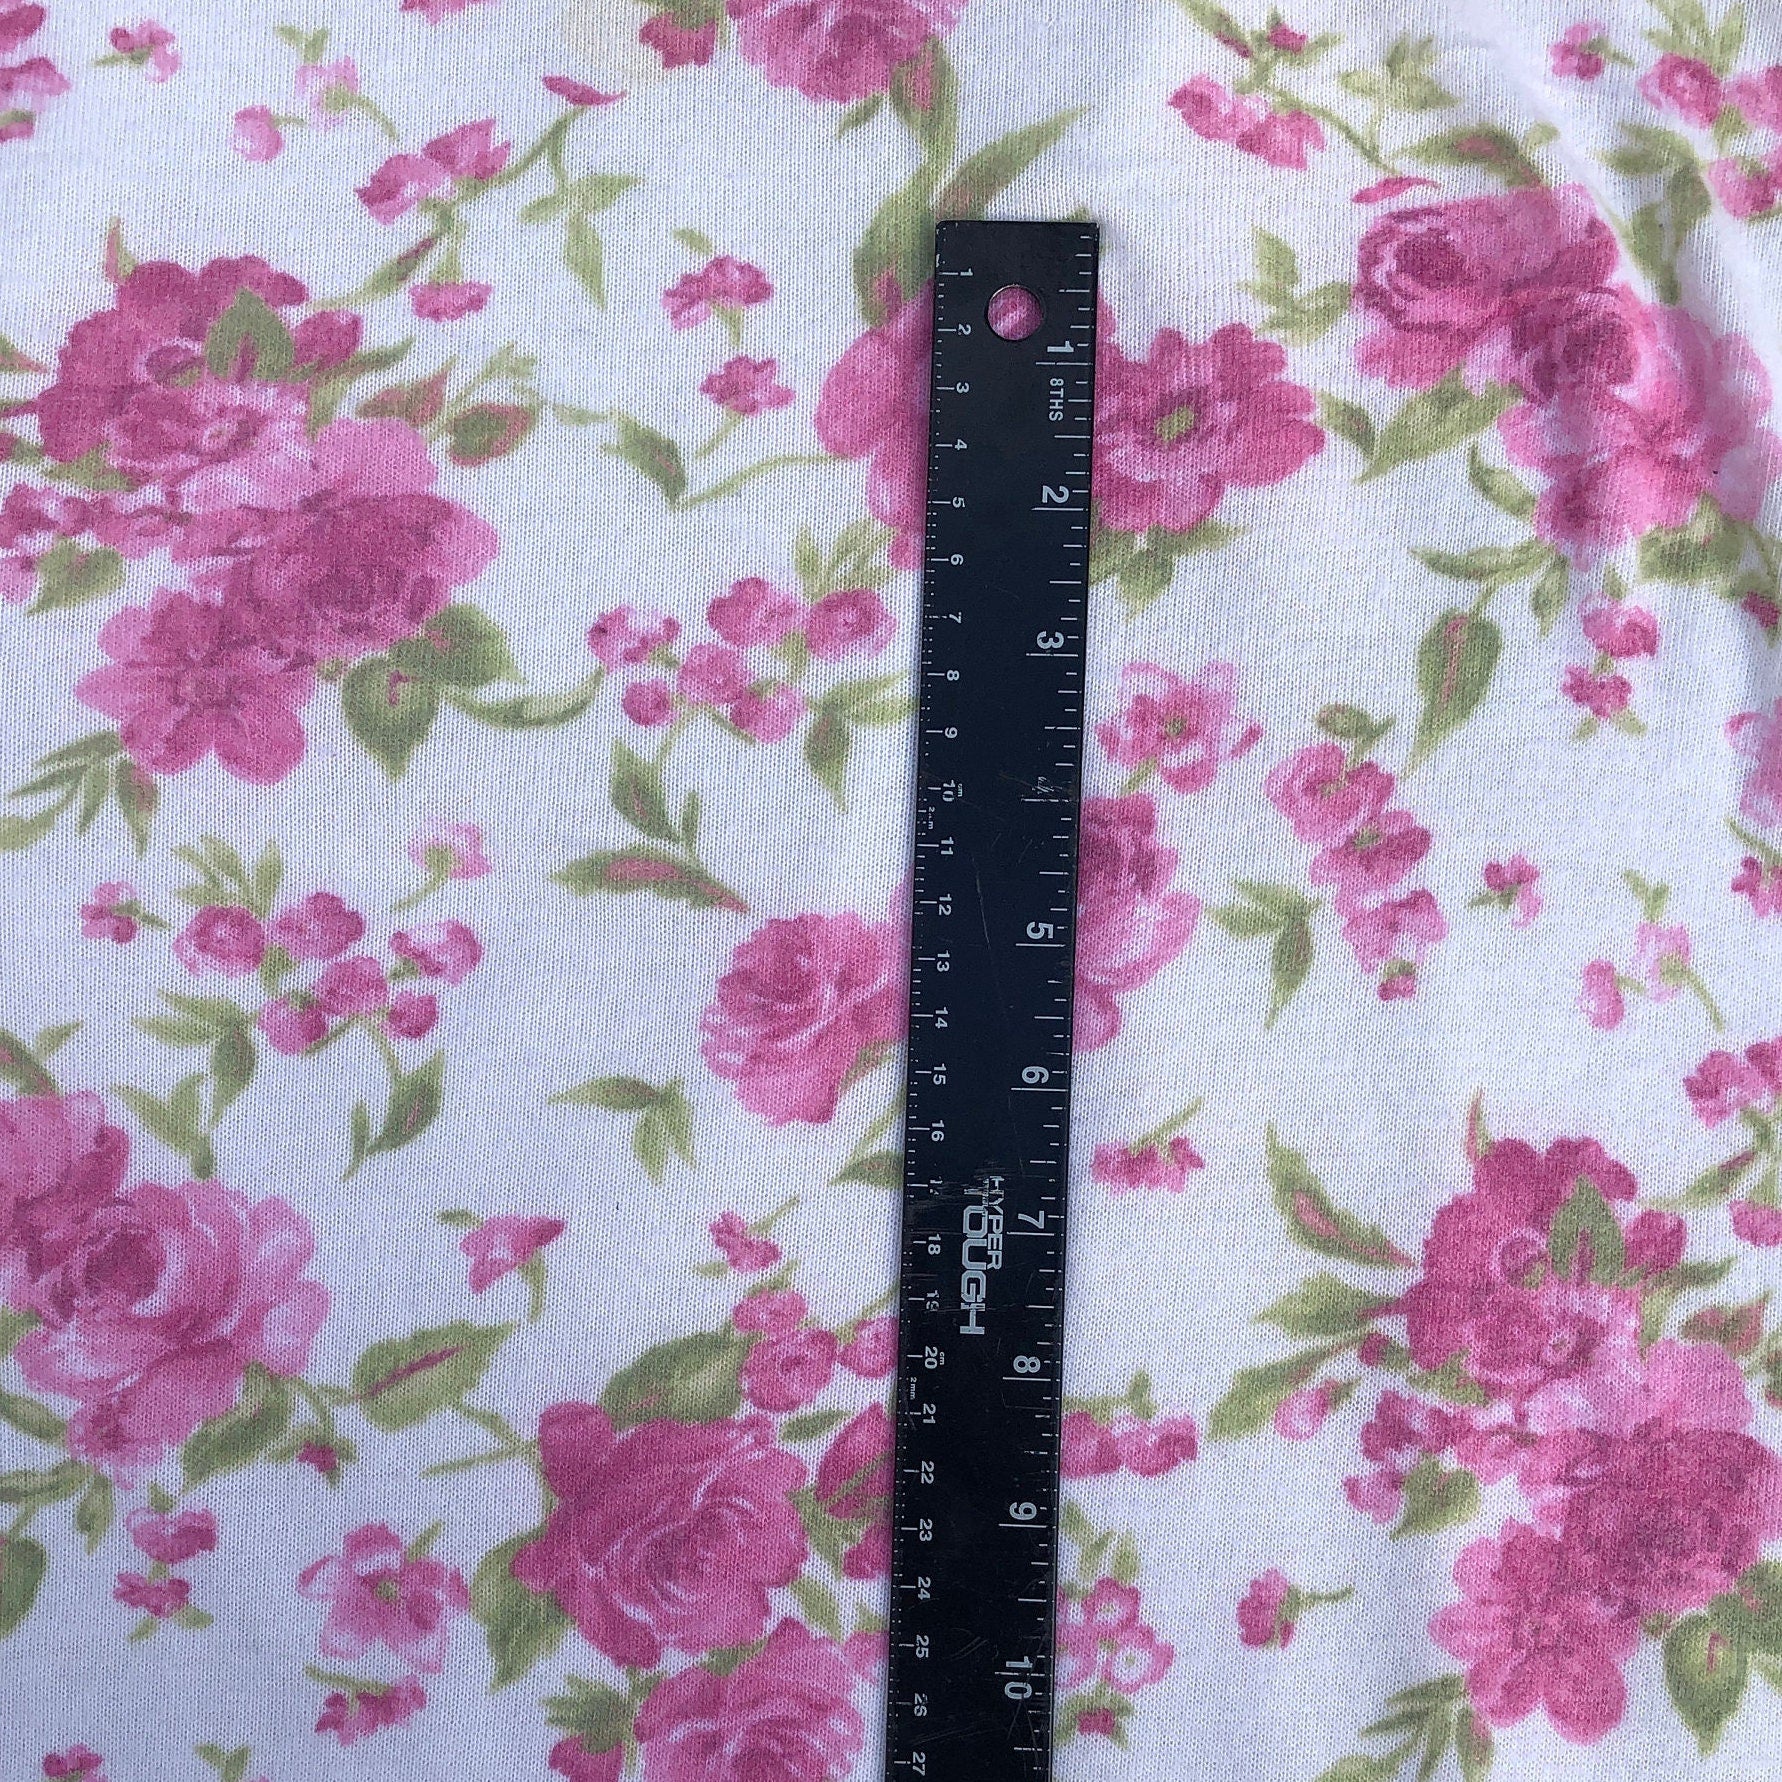 Texco Inc Rayon Spandex Small Flowers/ 4-Way Stretch Jersey Knit Ditsy Floral Print/Maternity, Apparel, DIY Fabric, Pink Peach 1 Yard